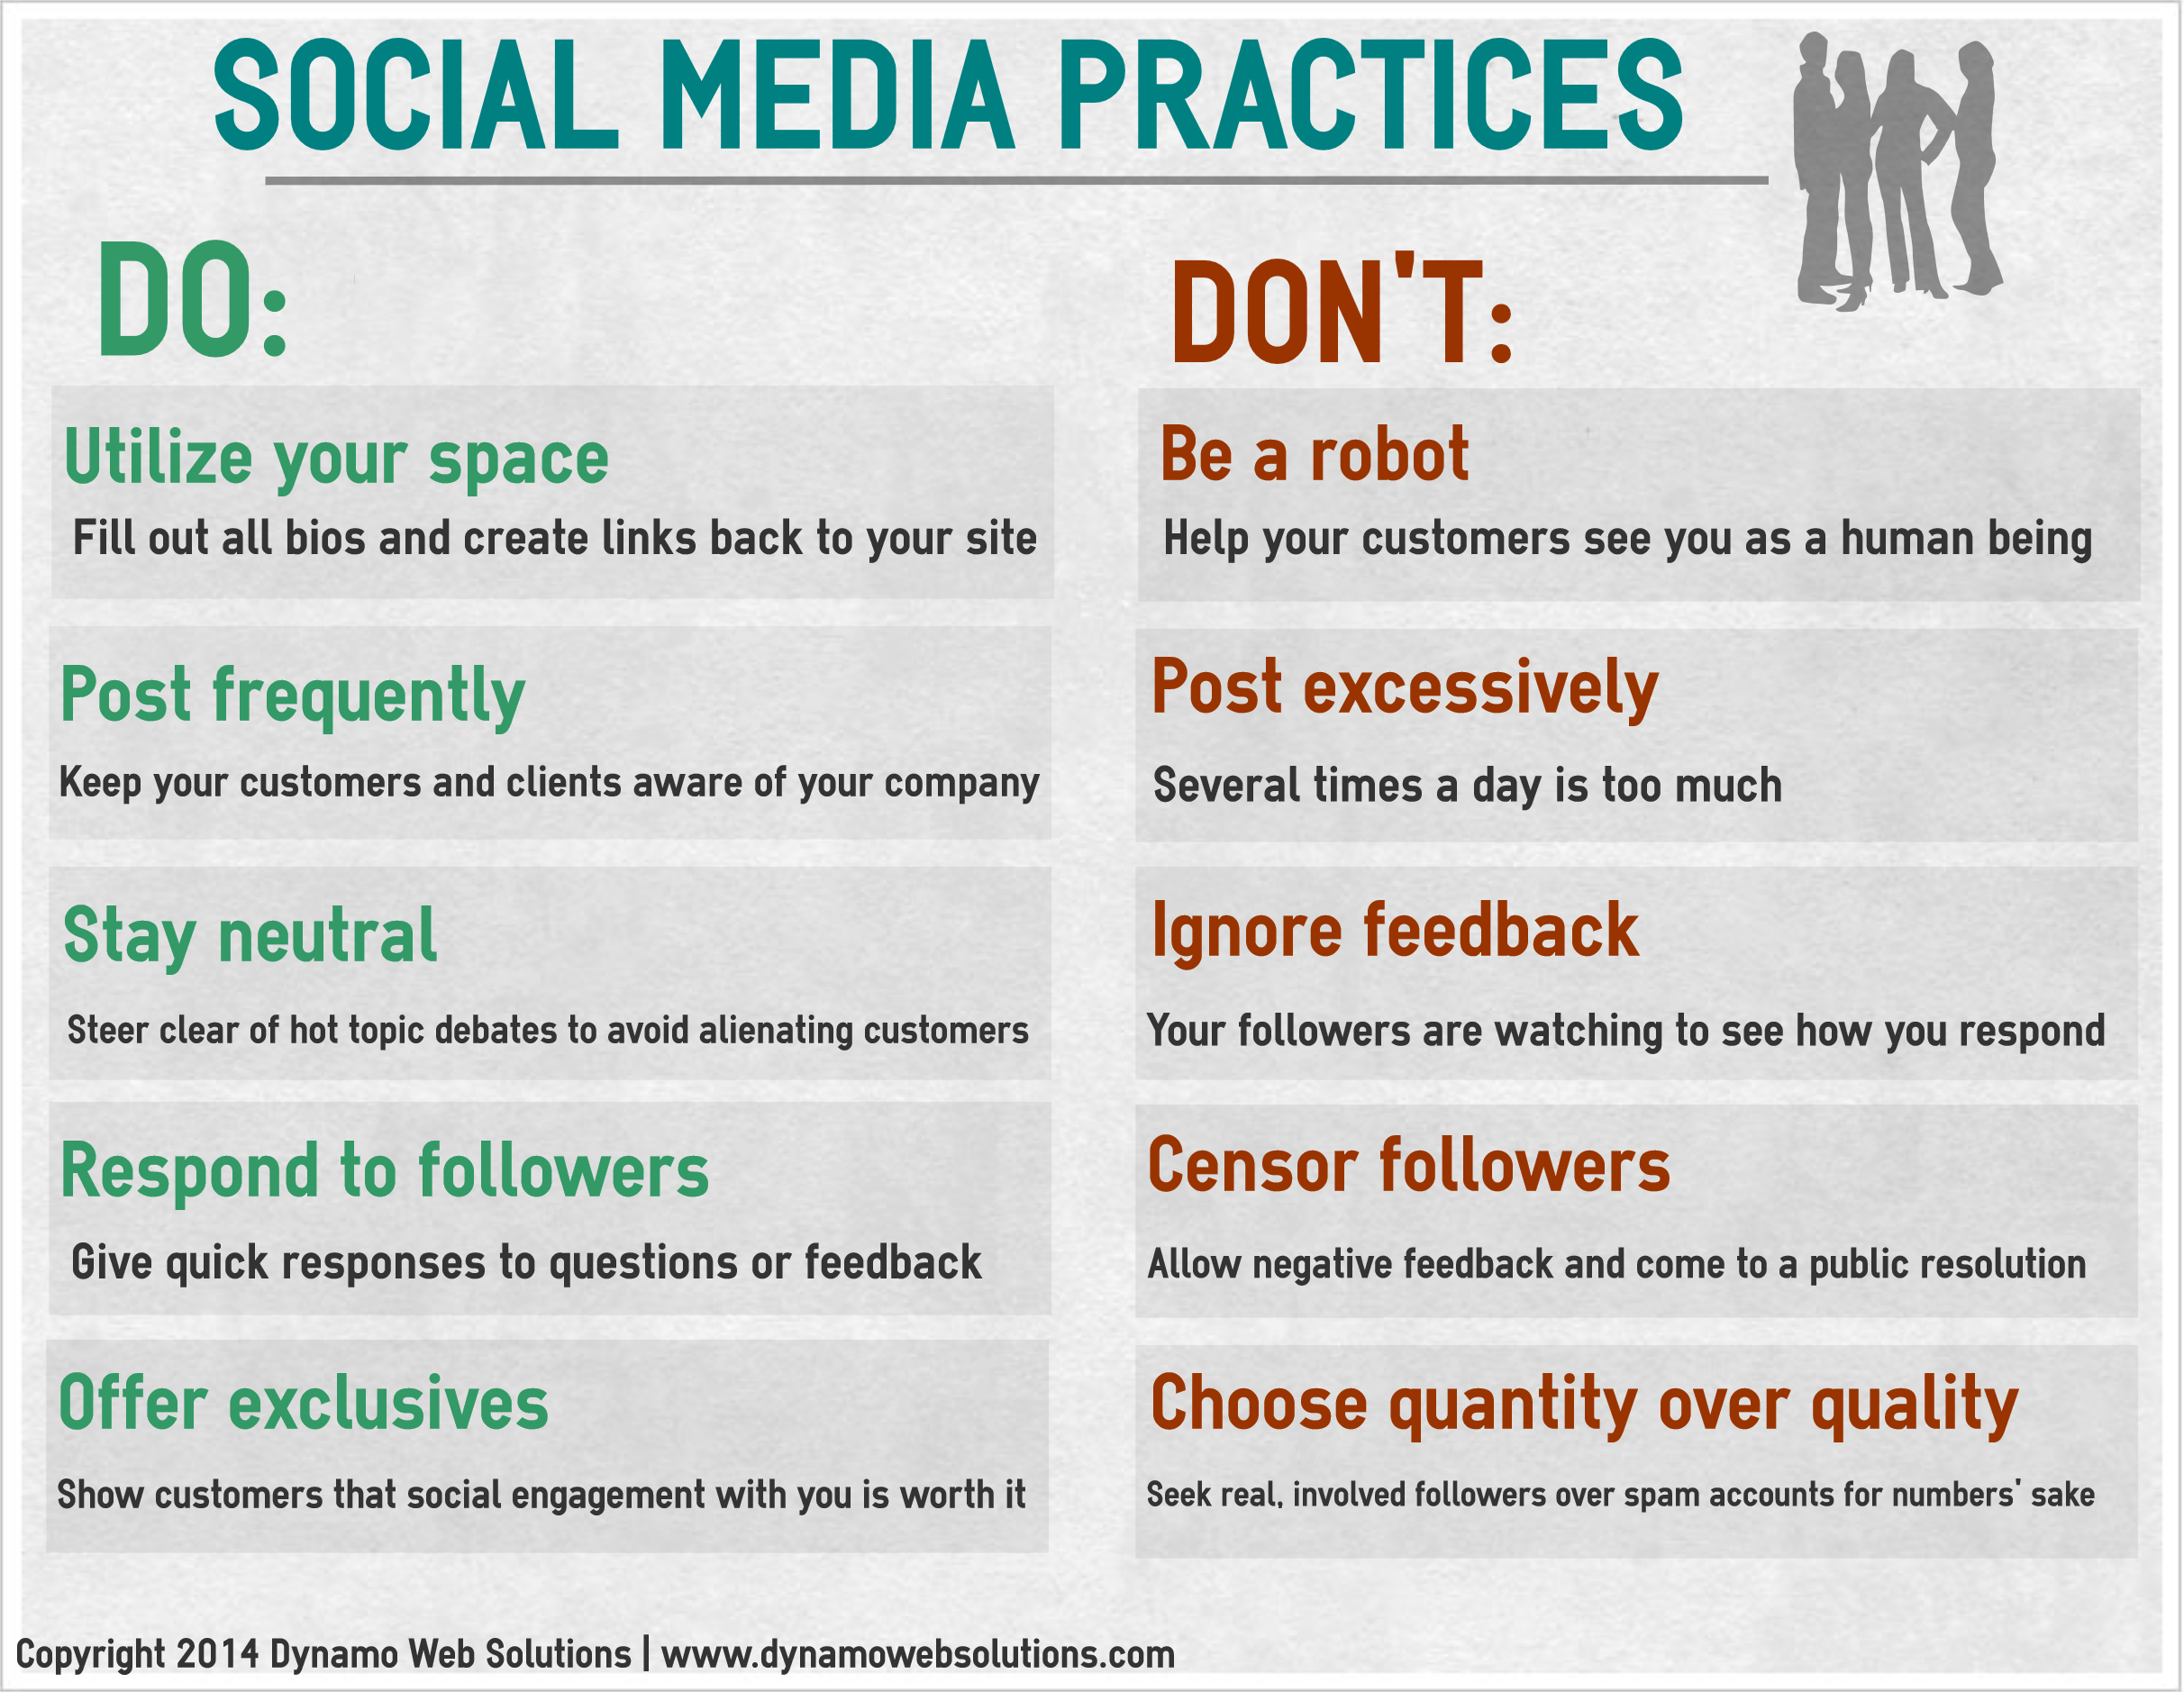 Social Media Practices by Dynamo Web Solutions IG - Infographics